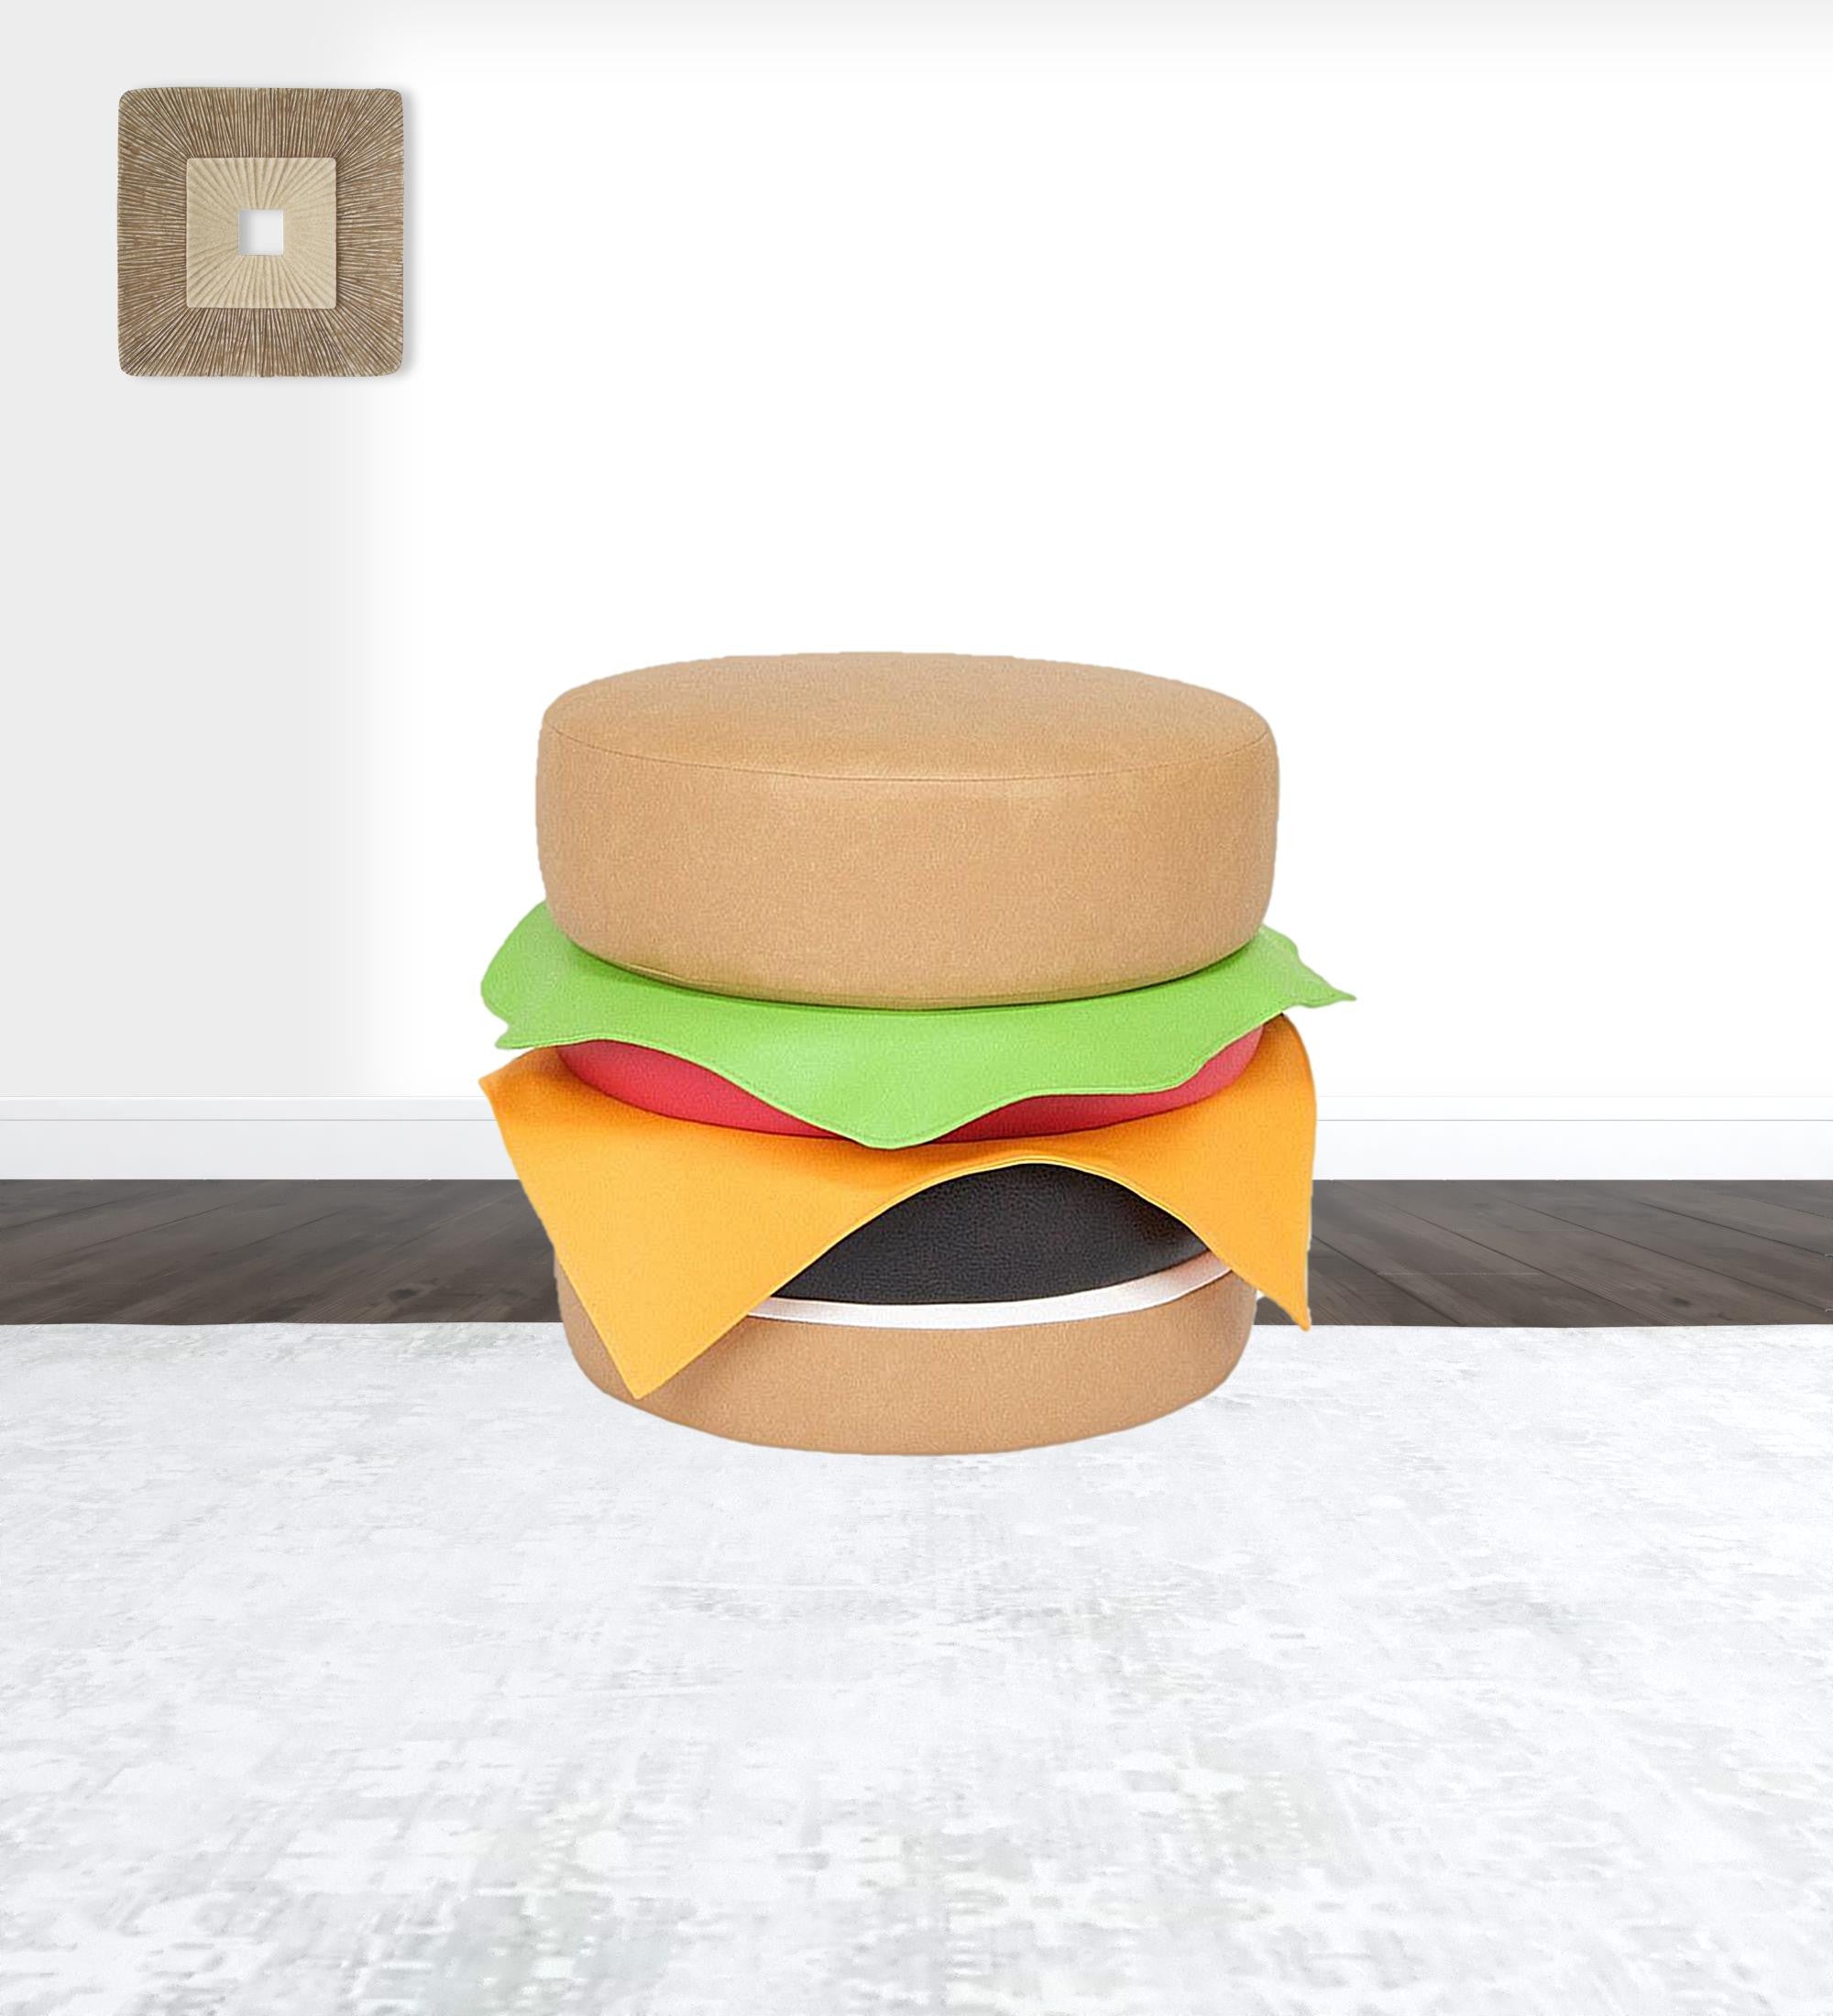 20" Brown Faux Leather Cheeseburger Novelty Ottoman